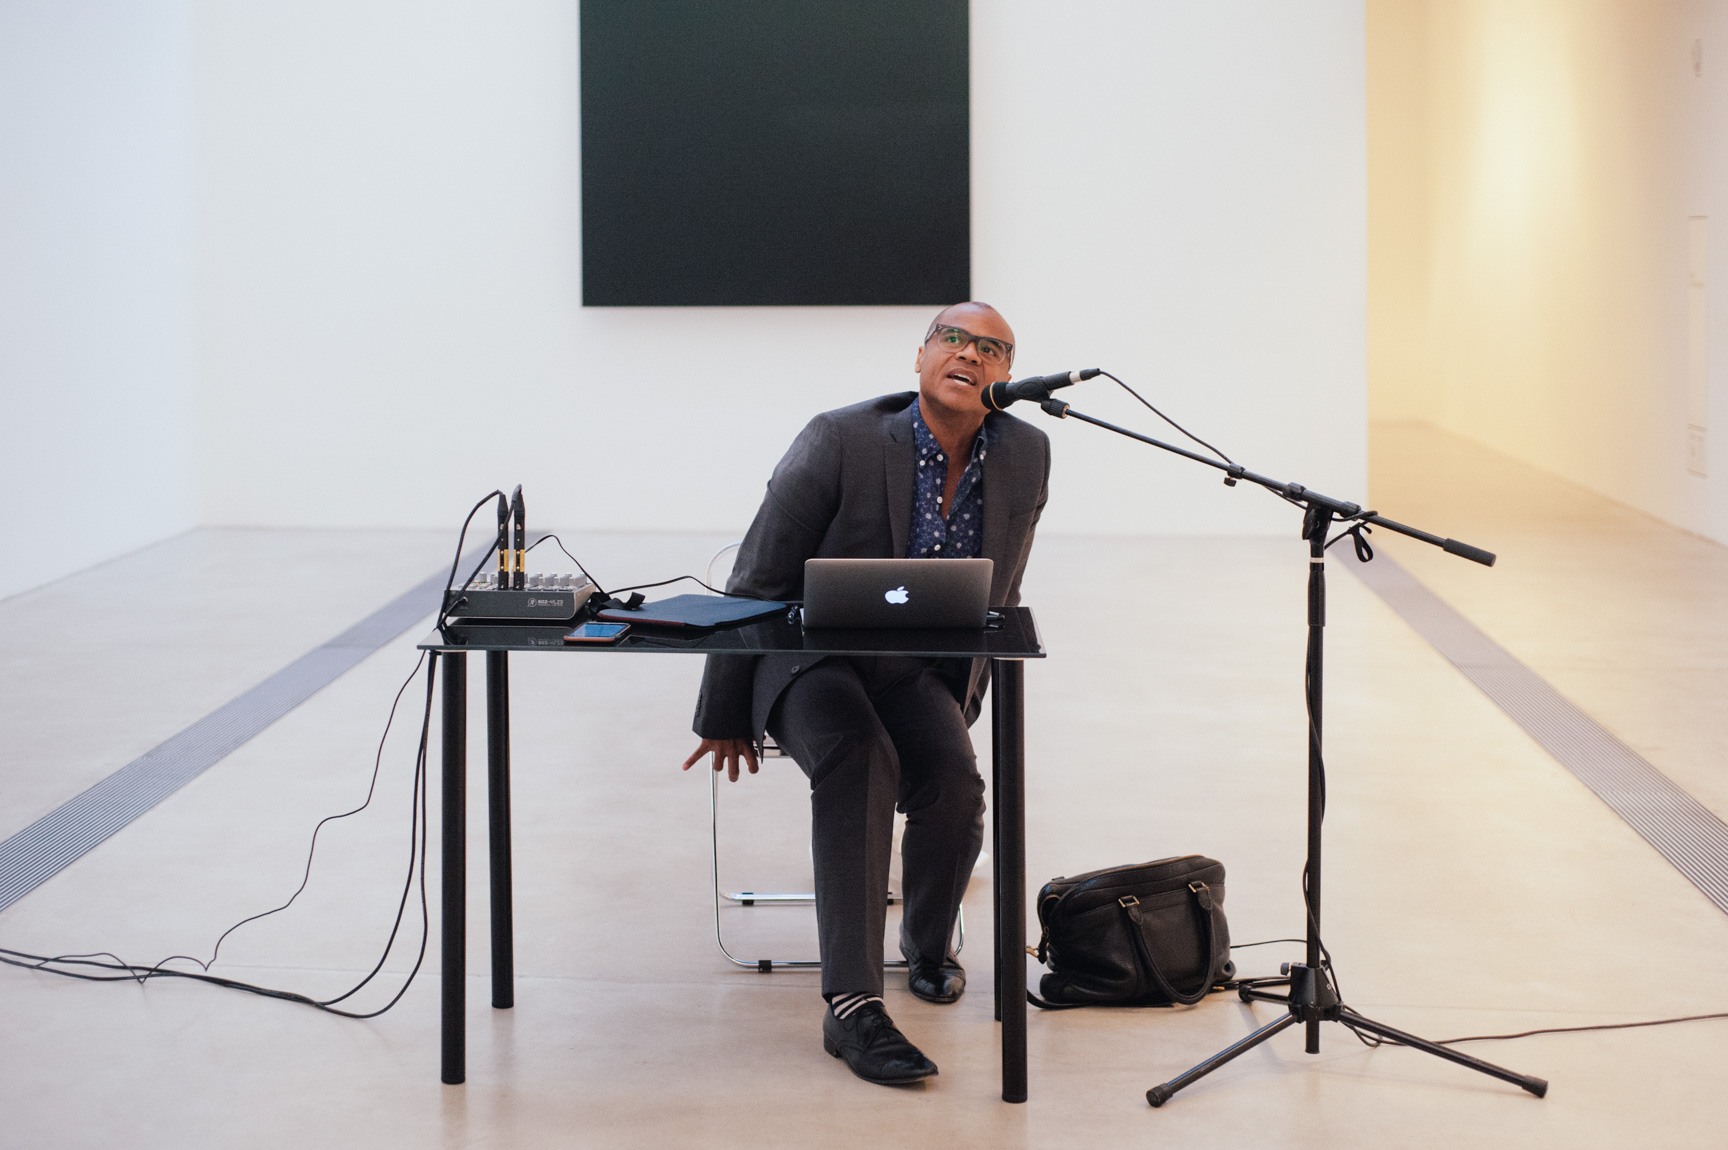 Ronaldo Wilson sits behind a desk with a microphone, with Ellsworth Kelly's "Blue Black" in the background.